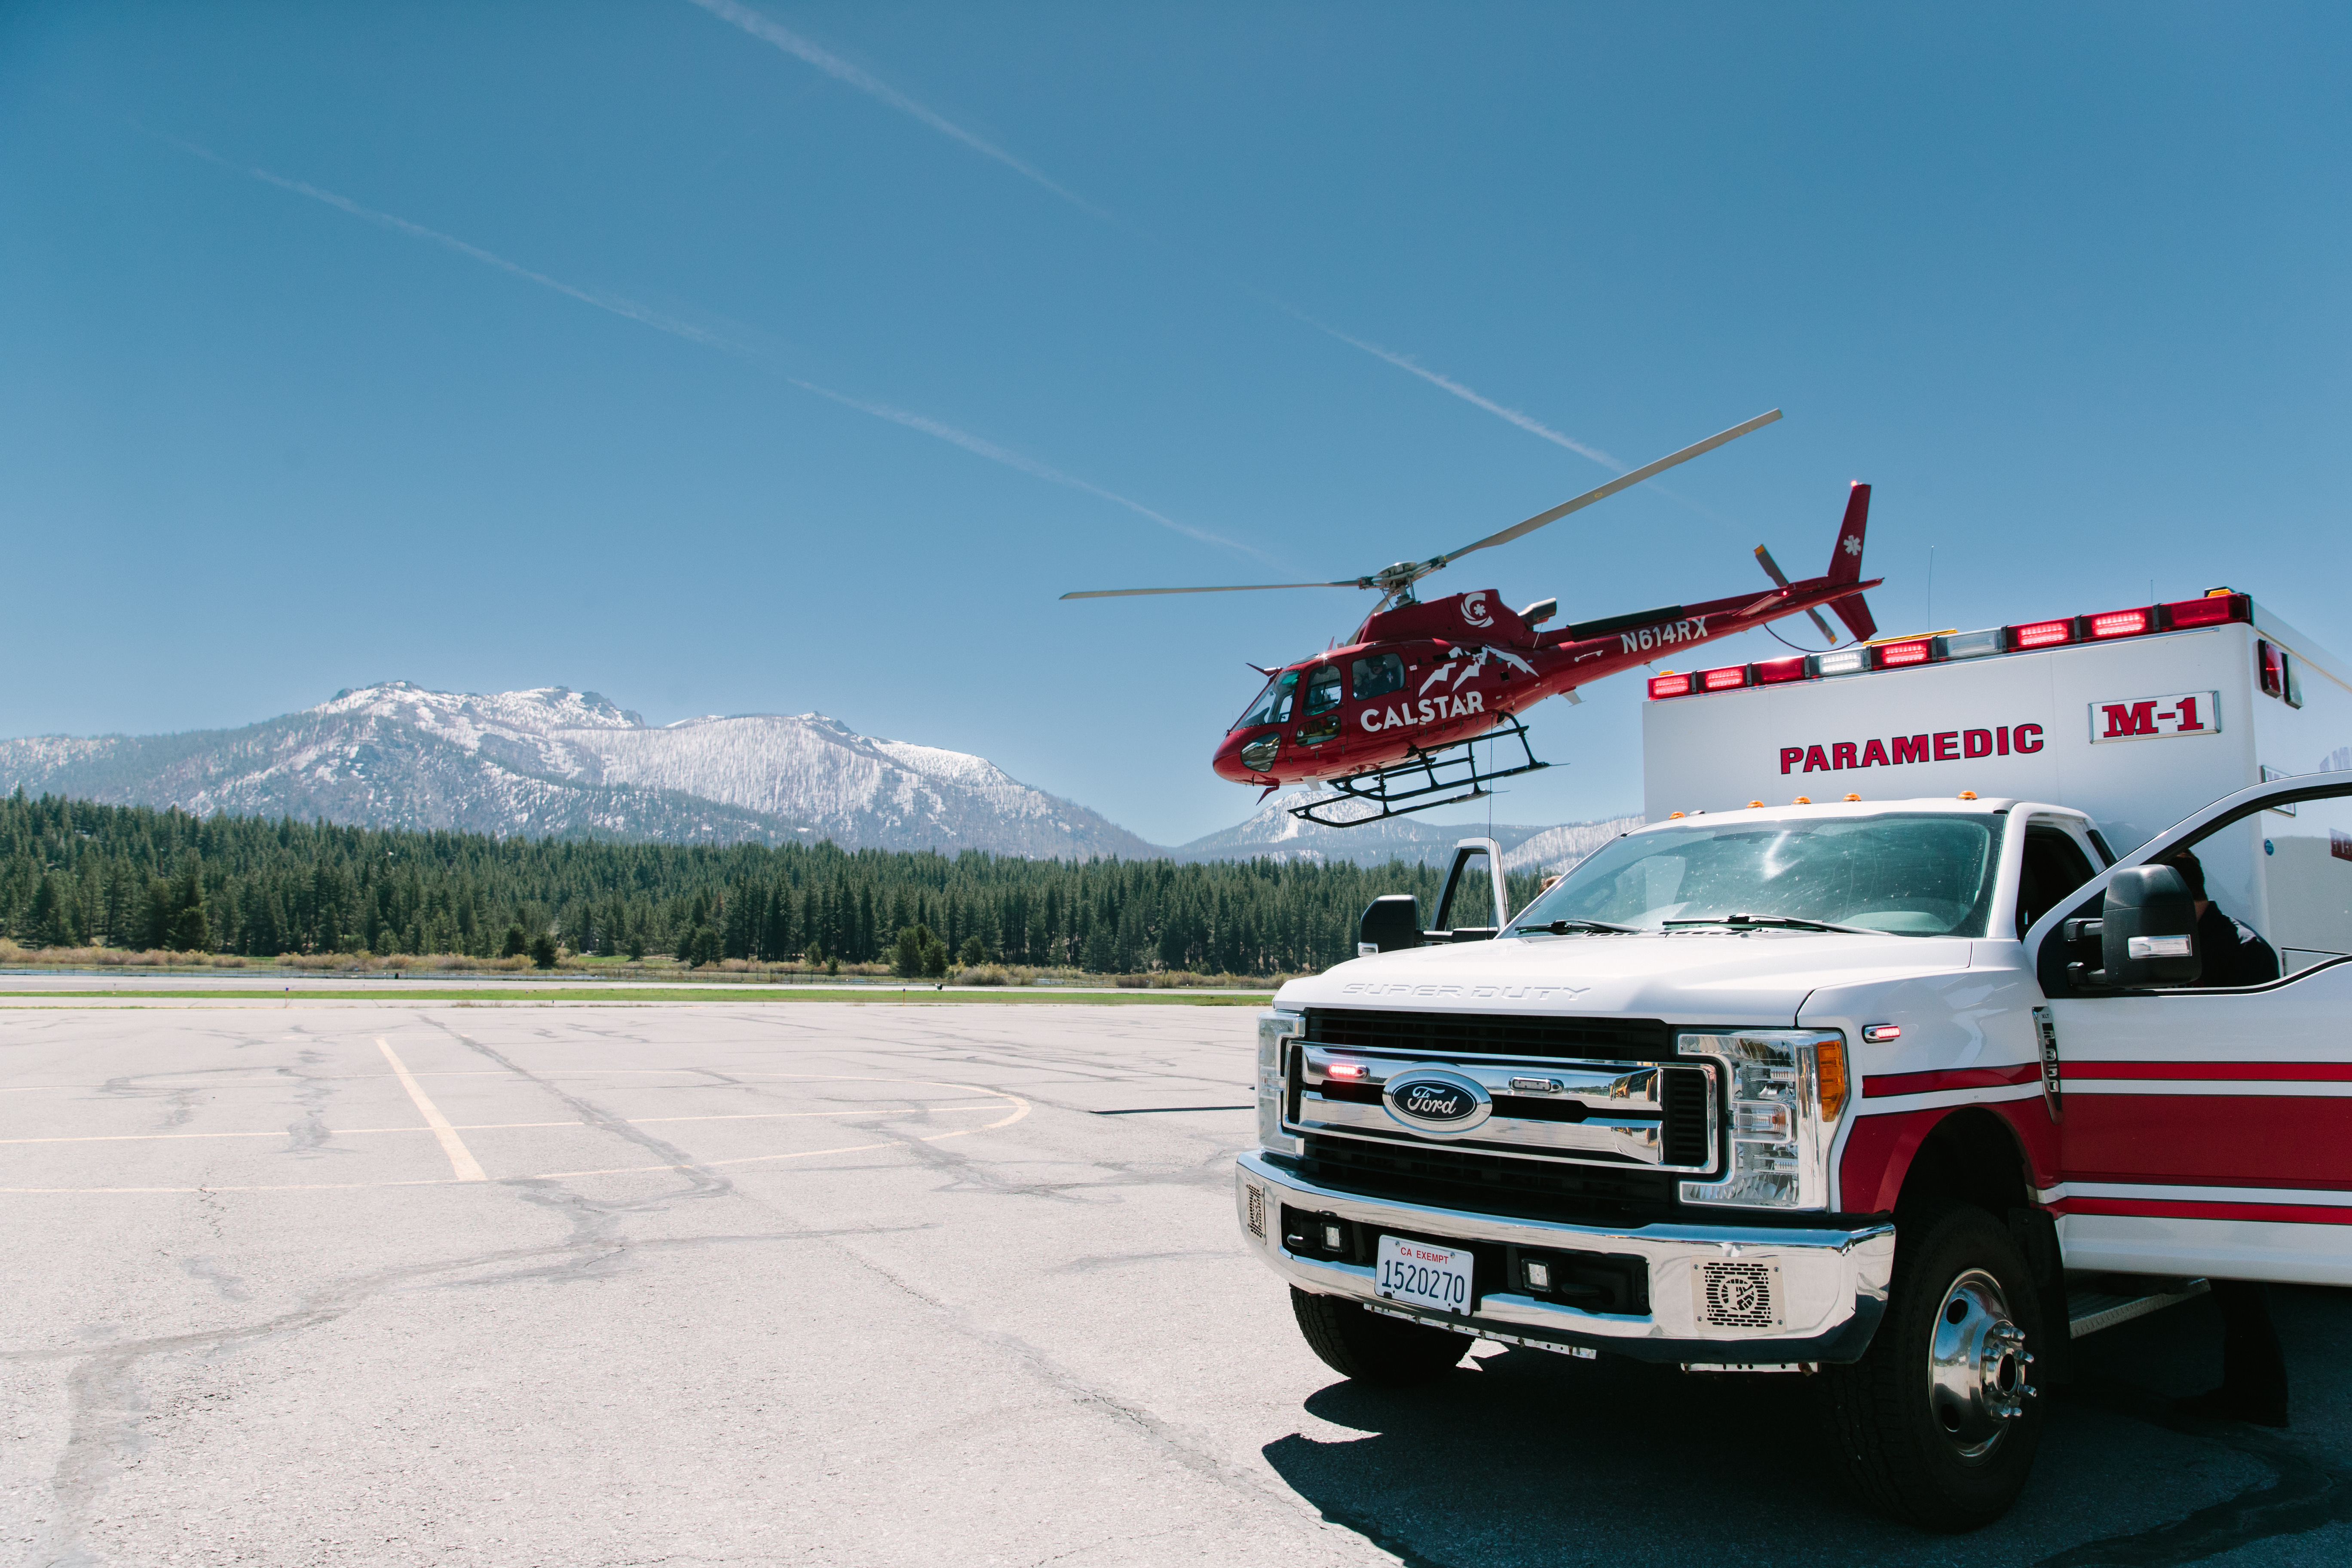 CalStar helicopter taking off from South Lake Tahoe Airport with ambulance in front